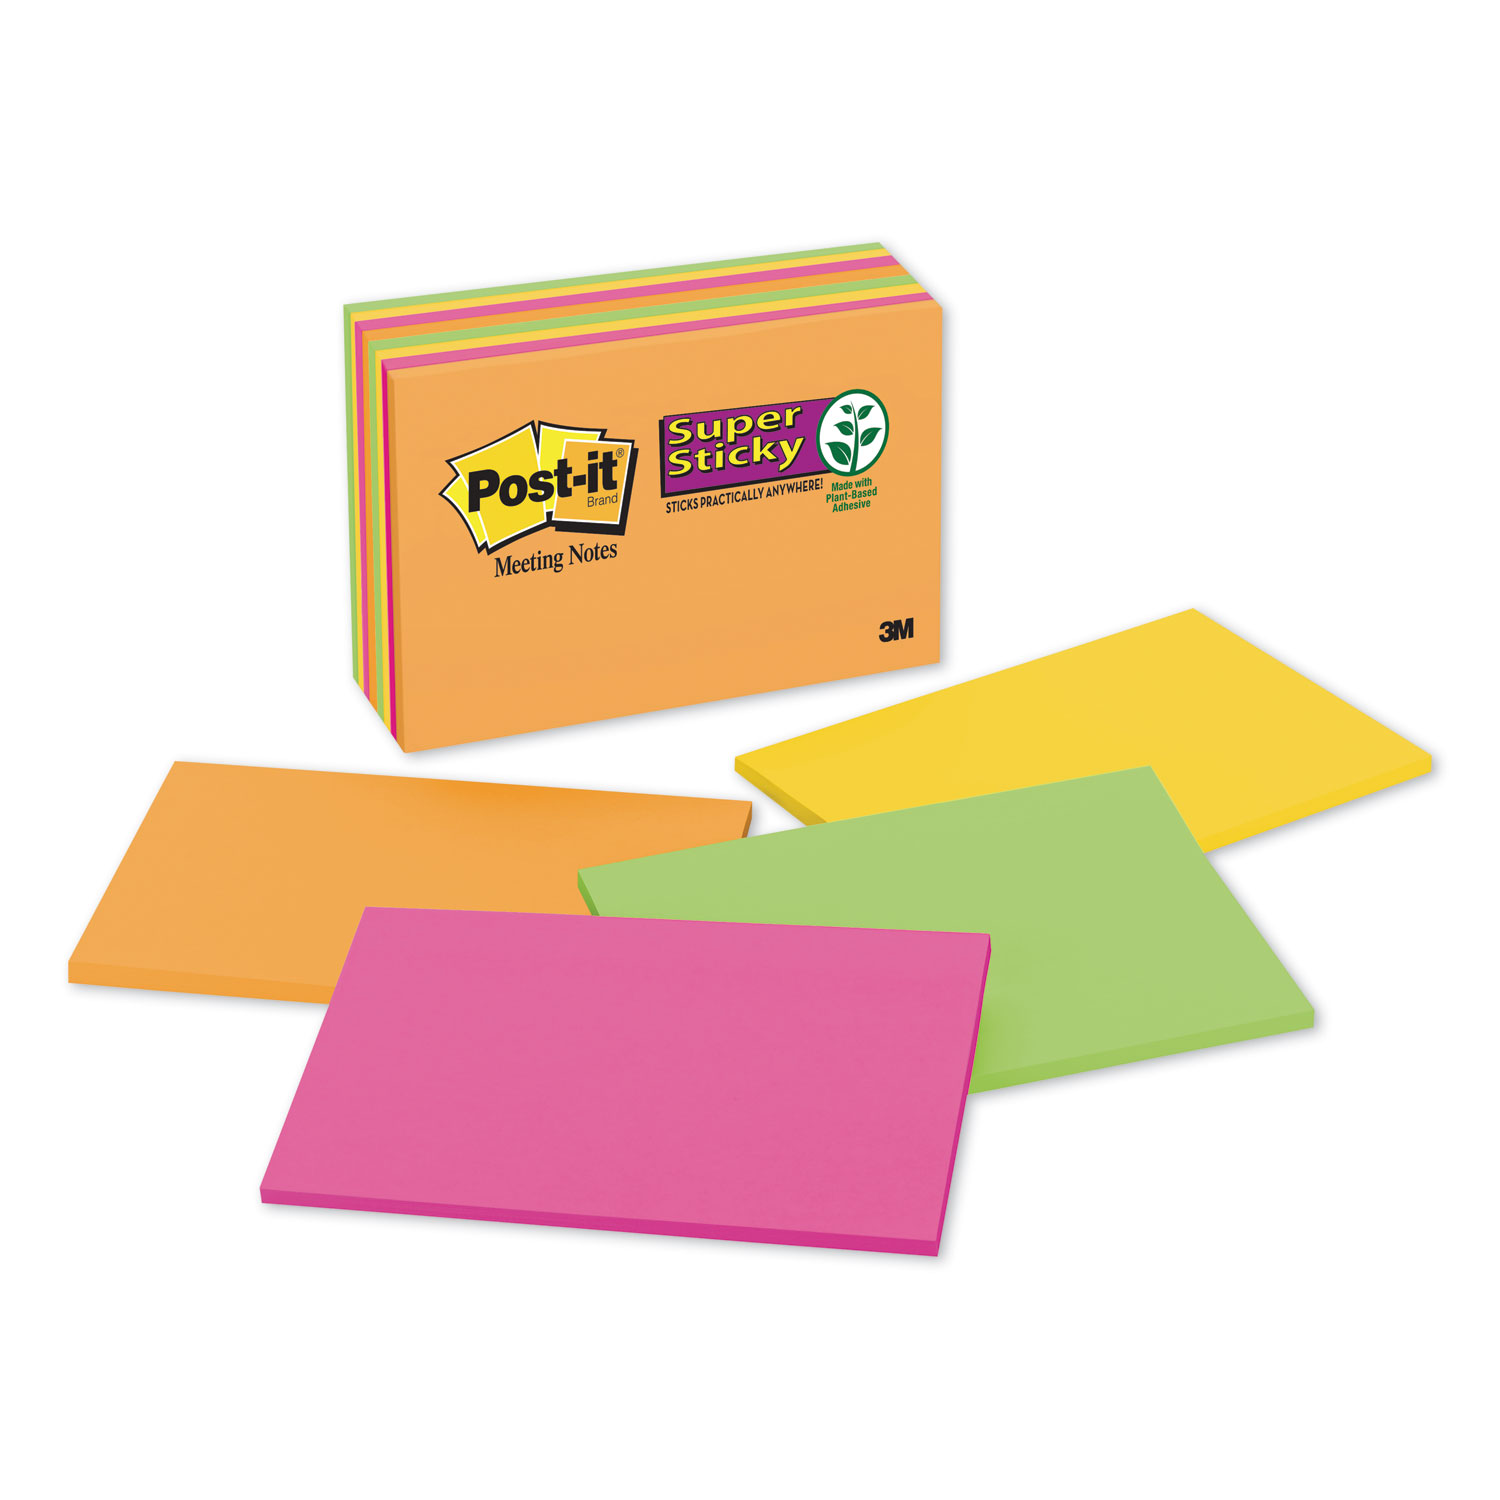  Post-it Notes Super Sticky 6445-SSP Meeting Notes in Rio de Janeiro Colors, 6 x 4, 45-Sheet, 8/Pack (MMM6445SSP) 